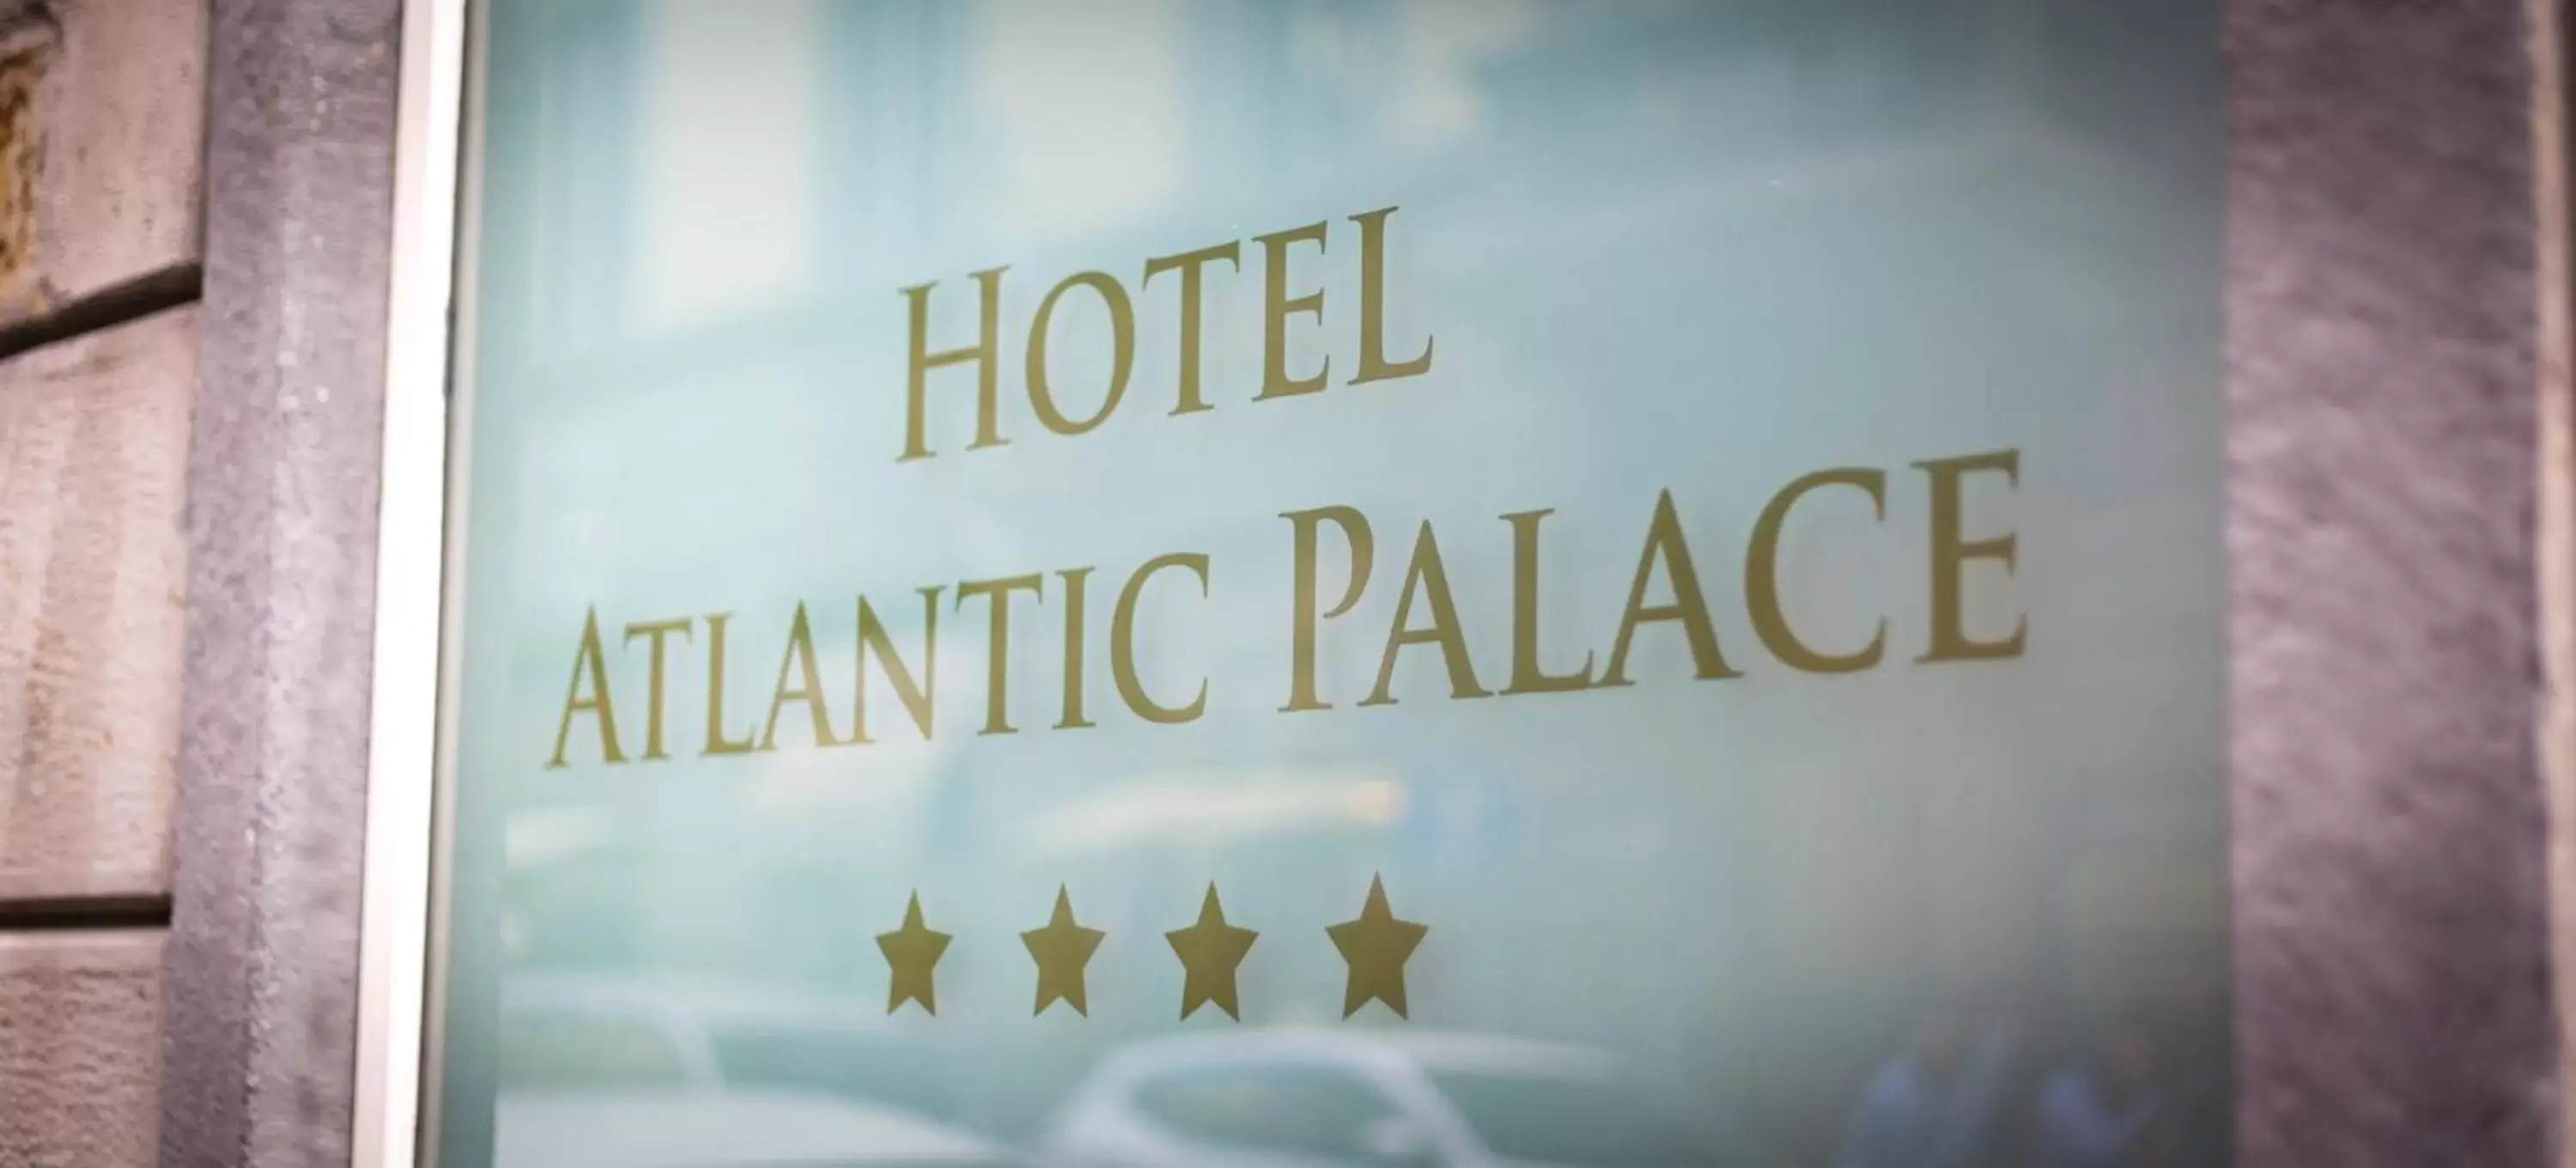 Decorative detail in Hotel Atlantic Palace